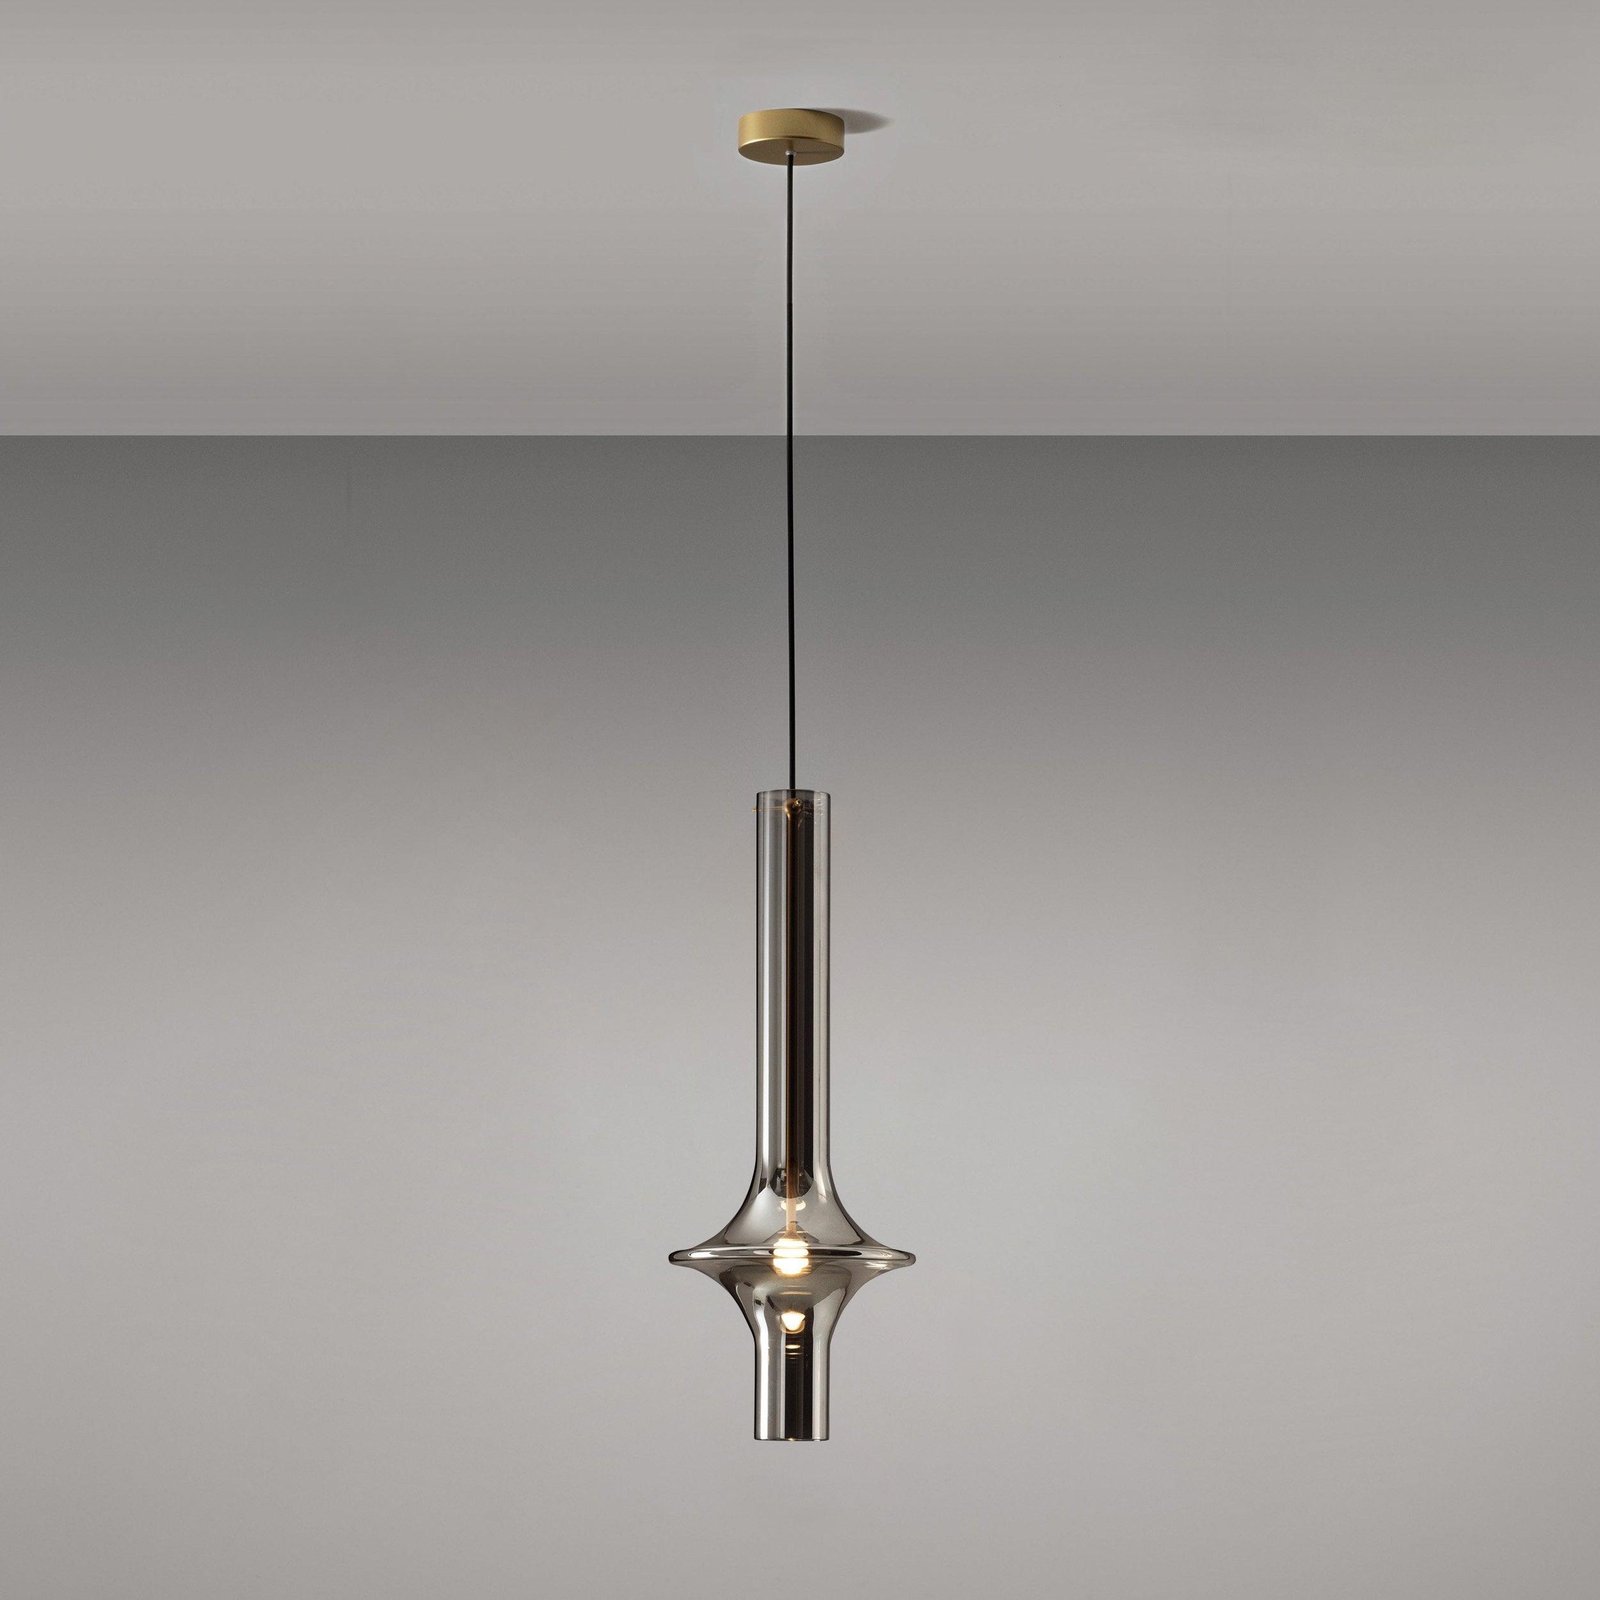 Gold Smoky Wonder Suspension Lamp with a diameter of 6.3 inches and a height of 18.1 inches (16cm x 46cm).